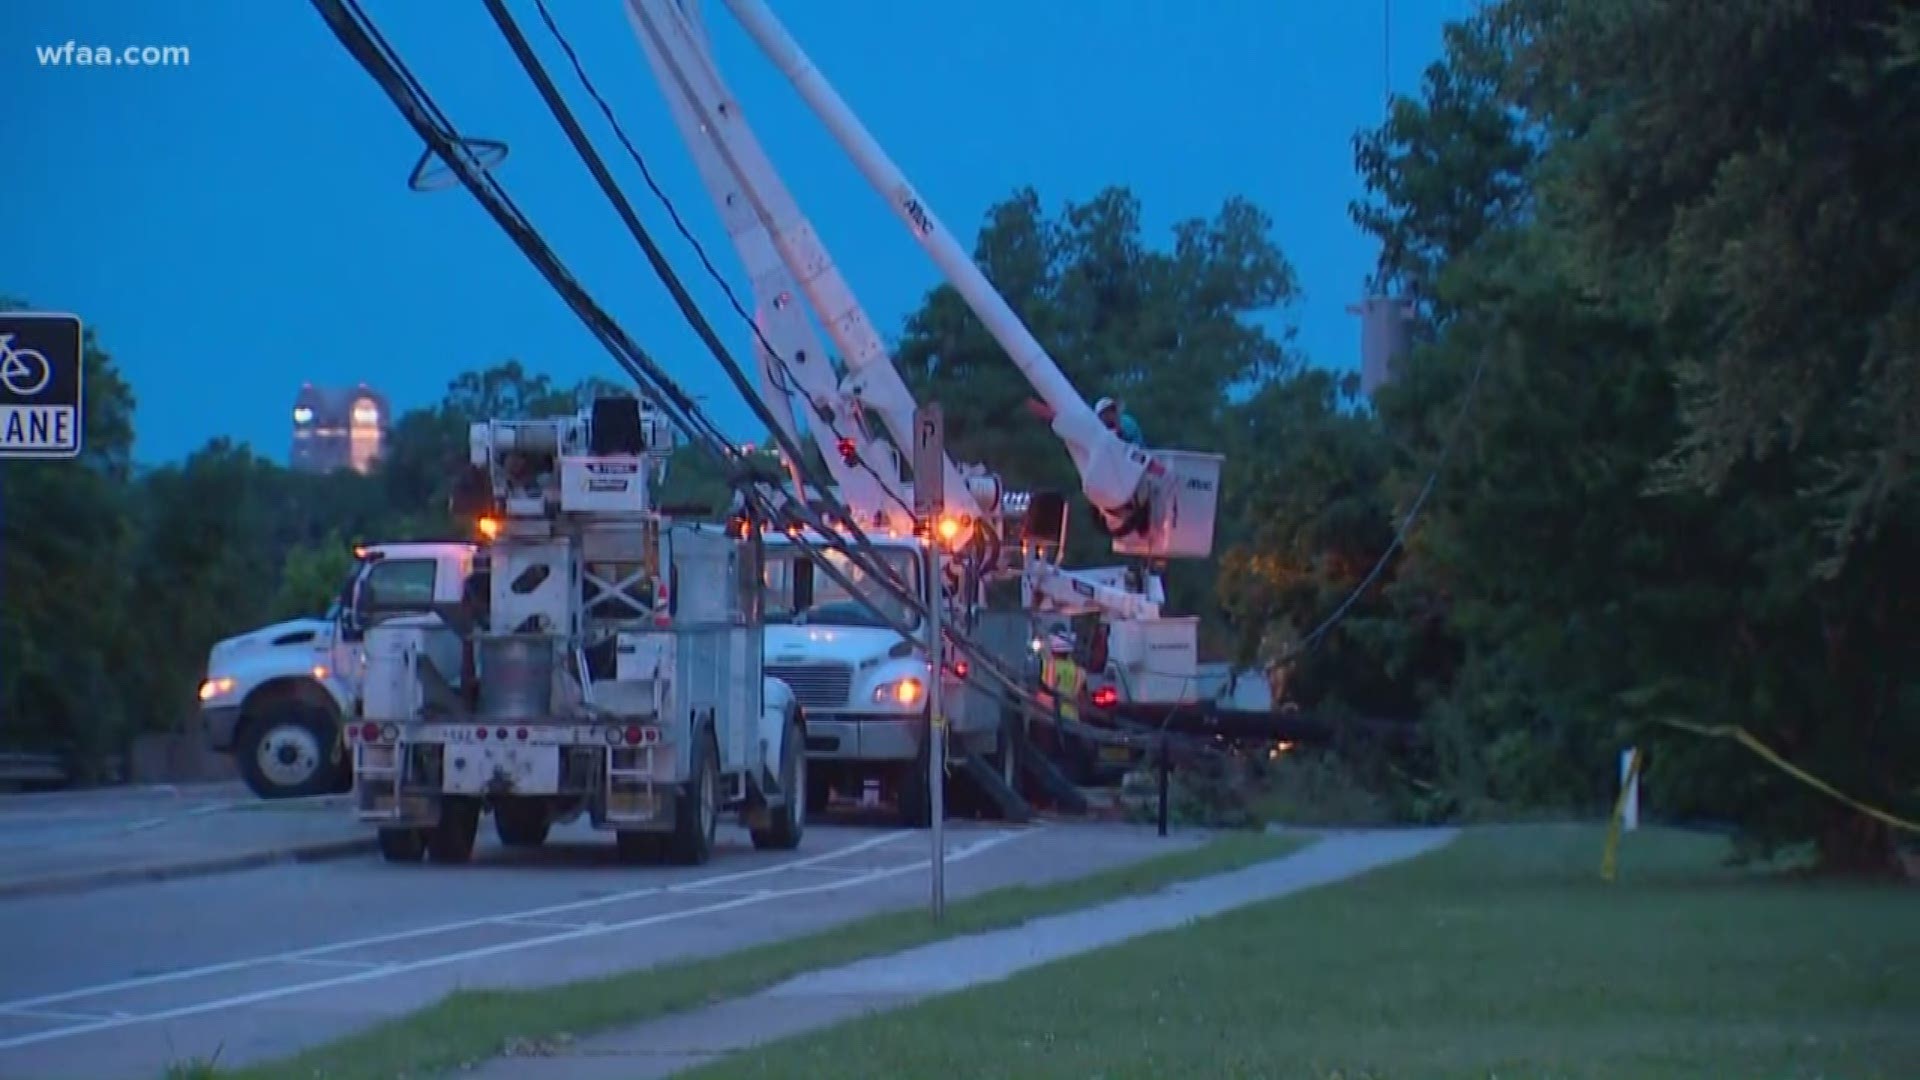 Oncor crews work to restore power days after storms